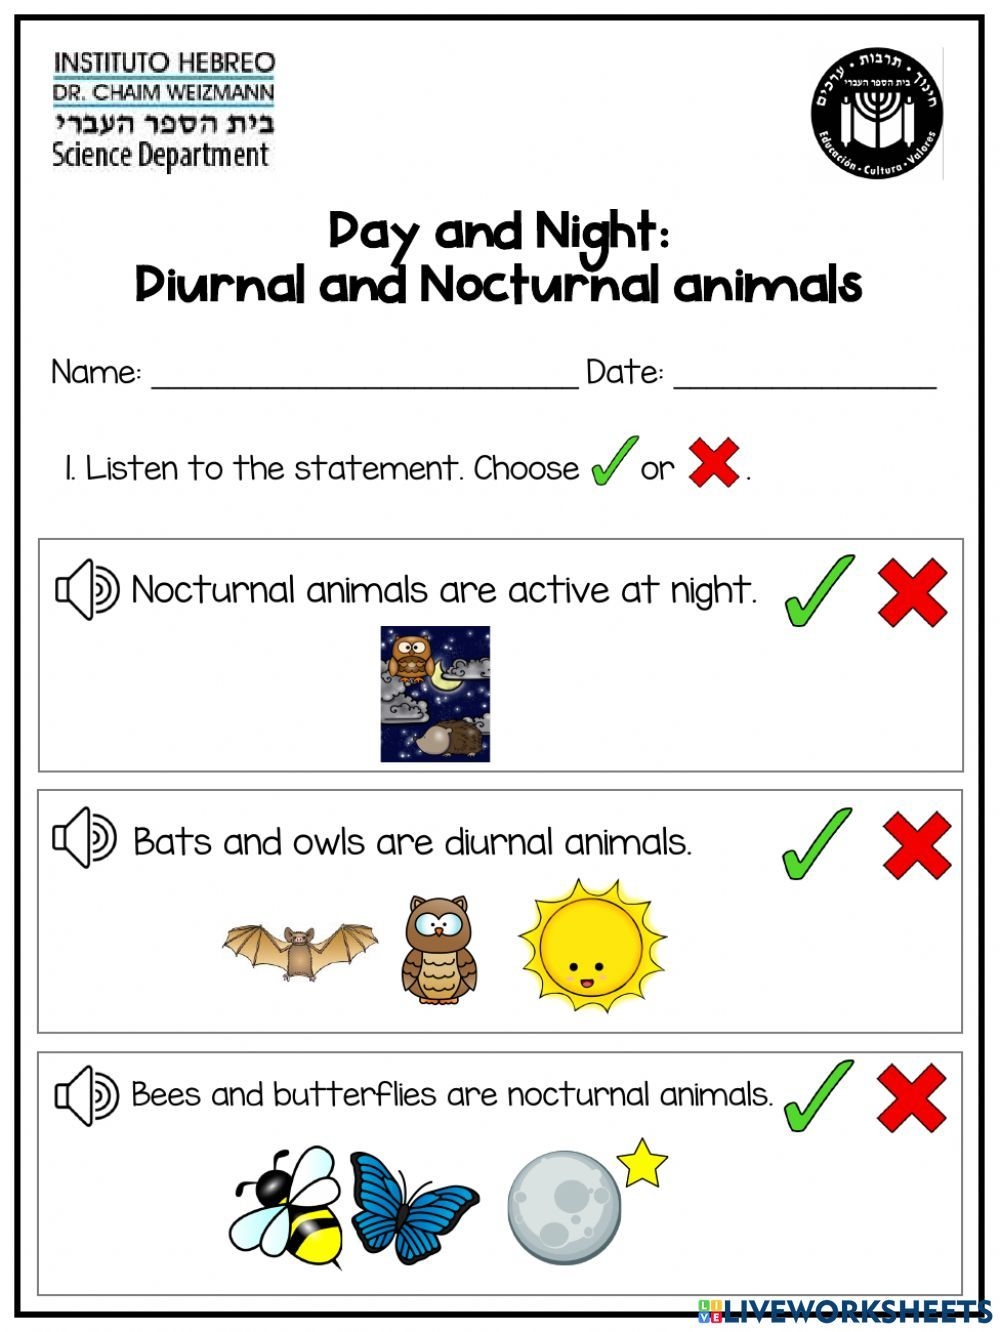 Day And Night Diurnal And Nocturnal Animals Worksheet Animal Worksheets Diurnal Animals Nocturnal Animals